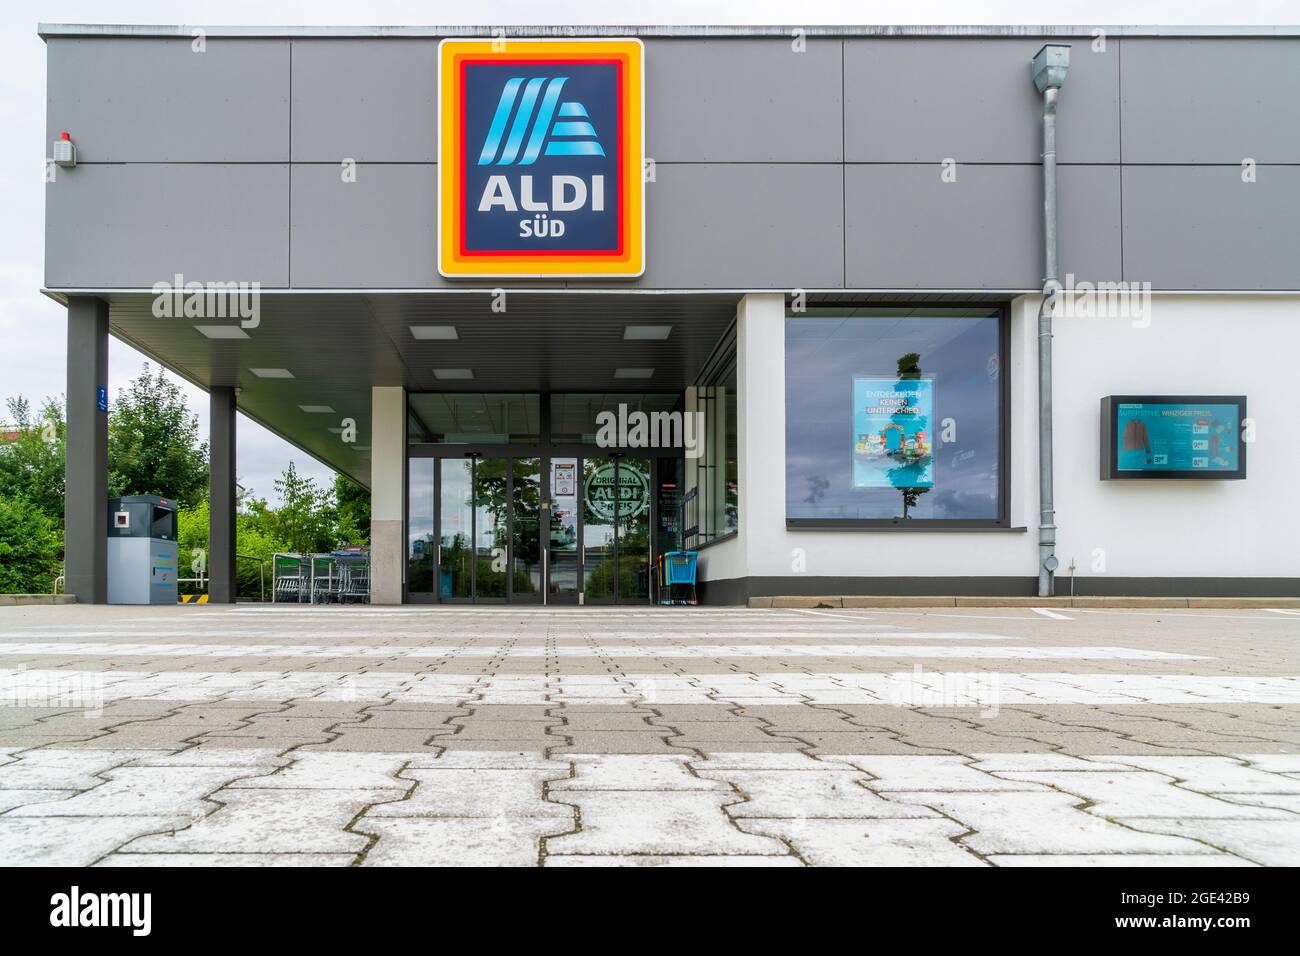 Aldi Schild High Resolution Stock Photography and Images - Alamy